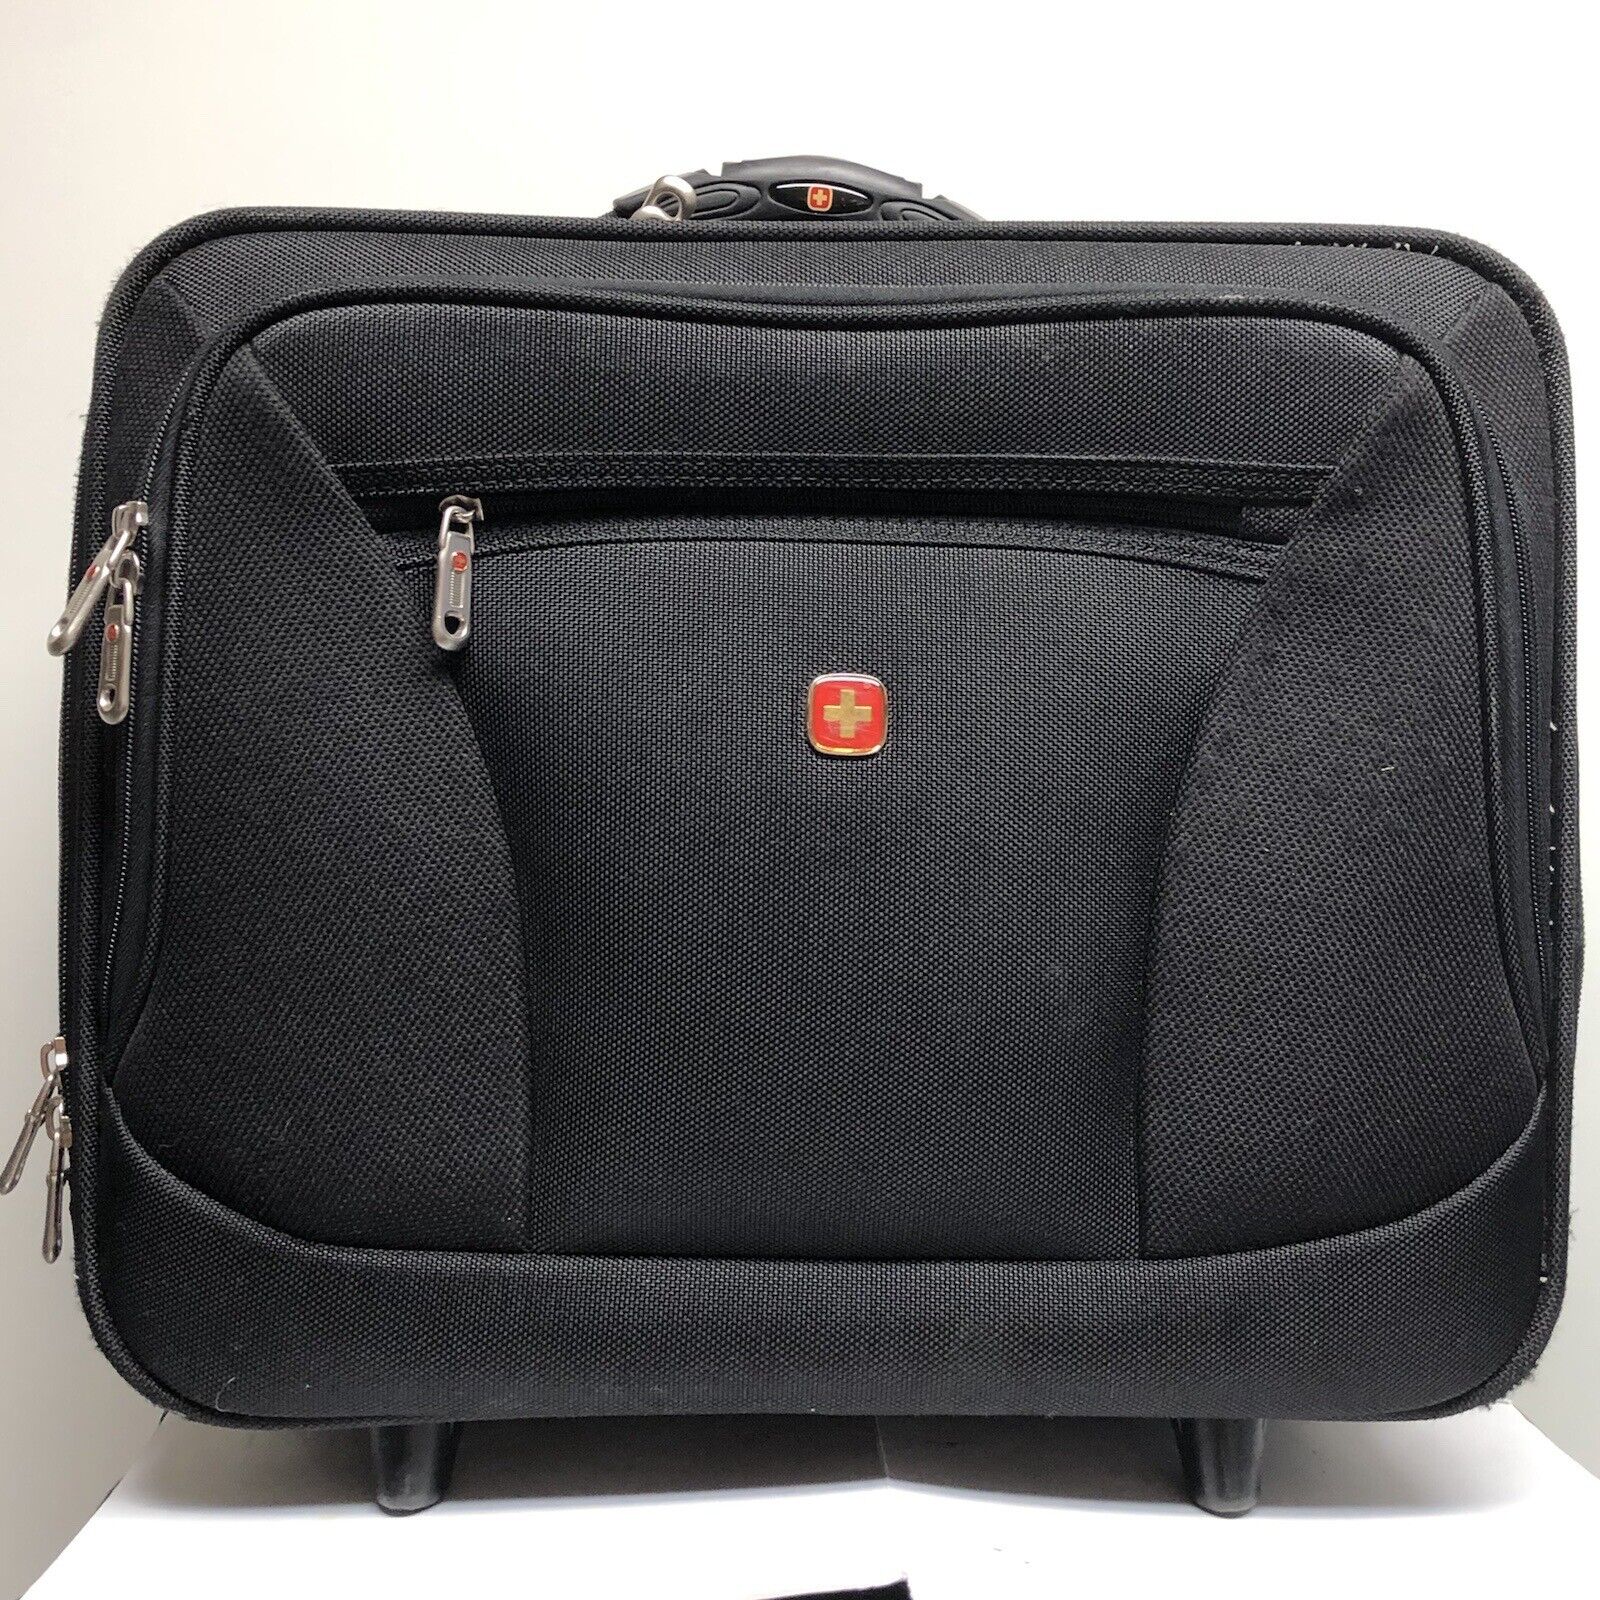 SWISSGEAR Wenger Granada Rolling Business Briefcase Carry On Bag Computer Travel